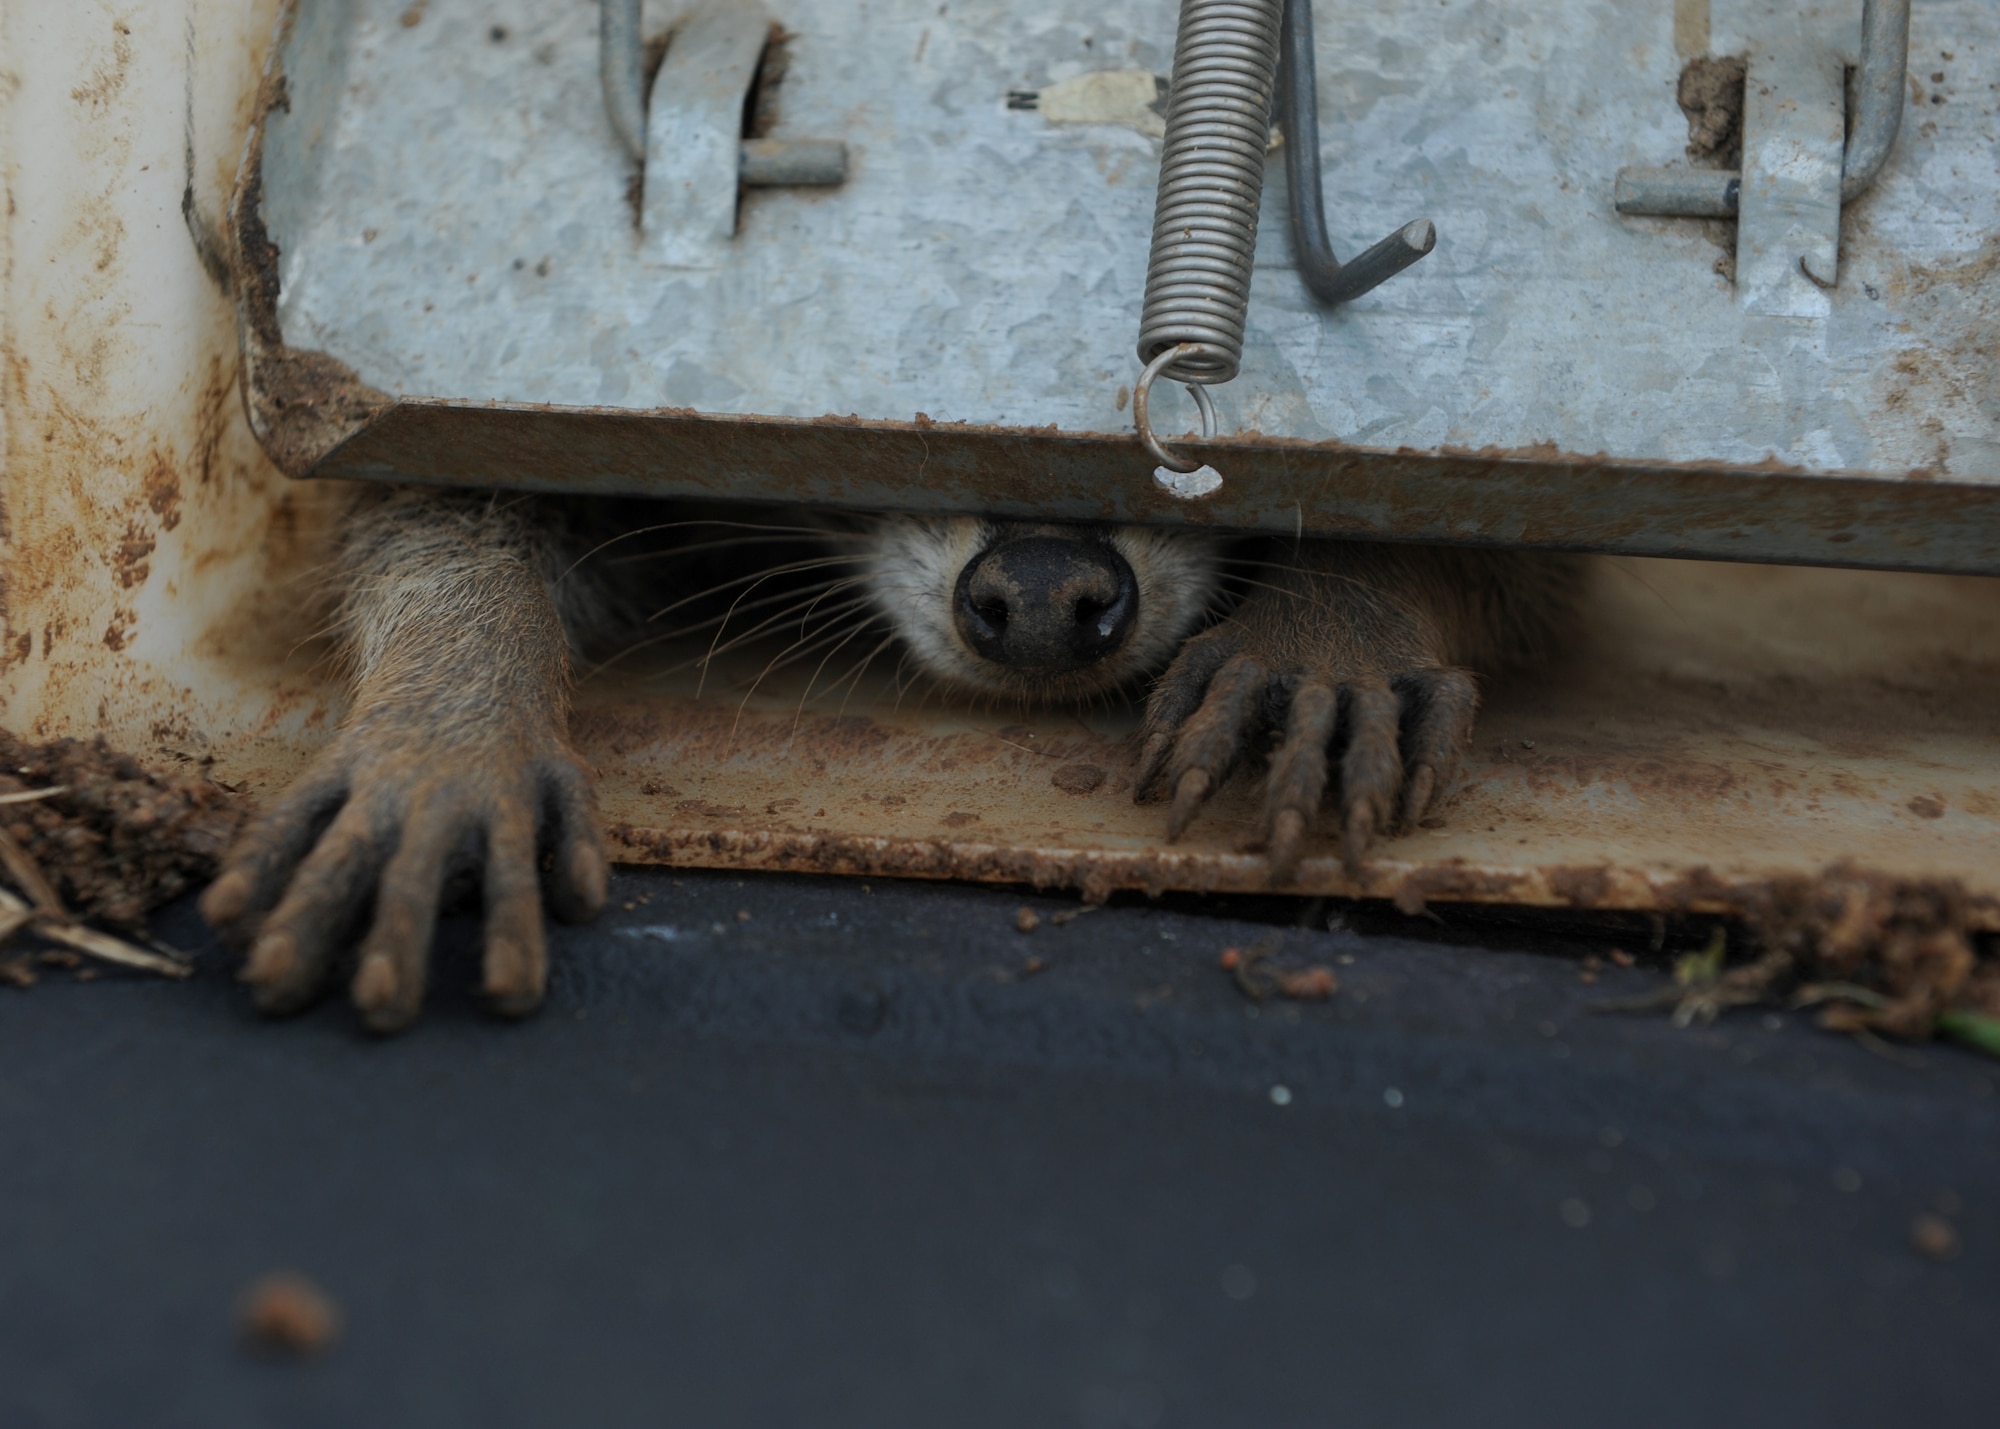 A raccoon trys to escape a live trap July 1, 2014, at Little Rock Air Force Base, Ark. Raccoons can cause damage to property and can also carry rabies. If they are healthy, they are released off base into a wildlife management area. (U.S. Air Force photo by Airman 1st Class Scott Poe)